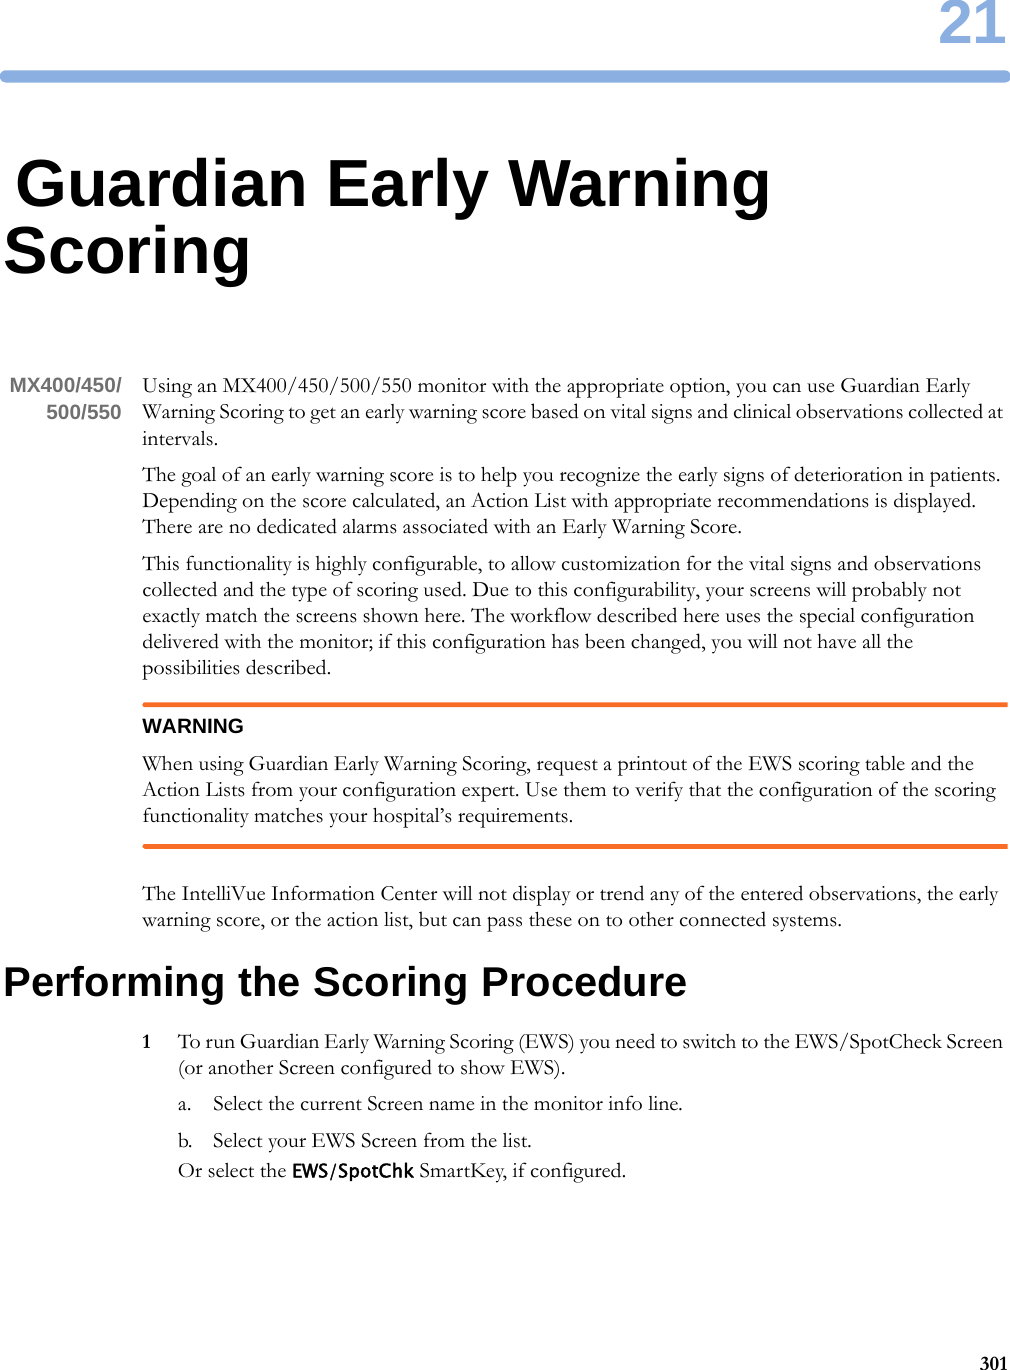 2130121Guardian Early Warning ScoringMX400/450/500/550 Using an MX400/450/500/550 monitor with the appropriate option, you can use Guardian Early Warning Scoring to get an early warning score based on vital signs and clinical observations collected at intervals.The goal of an early warning score is to help you recognize the early signs of deterioration in patients. Depending on the score calculated, an Action List with appropriate recommendations is displayed. There are no dedicated alarms associated with an Early Warning Score.This functionality is highly configurable, to allow customization for the vital signs and observations collected and the type of scoring used. Due to this configurability, your screens will probably not exactly match the screens shown here. The workflow described here uses the special configuration delivered with the monitor; if this configuration has been changed, you will not have all the possibilities described.WARNINGWhen using Guardian Early Warning Scoring, request a printout of the EWS scoring table and the Action Lists from your configuration expert. Use them to verify that the configuration of the scoring functionality matches your hospital’s requirements.The IntelliVue Information Center will not display or trend any of the entered observations, the early warning score, or the action list, but can pass these on to other connected systems.Performing the Scoring Procedure1To run Guardian Early Warning Scoring (EWS) you need to switch to the EWS/SpotCheck Screen (or another Screen configured to show EWS).a. Select the current Screen name in the monitor info line.b. Select your EWS Screen from the list.Or select the EWS/SpotChk SmartKey, if configured.